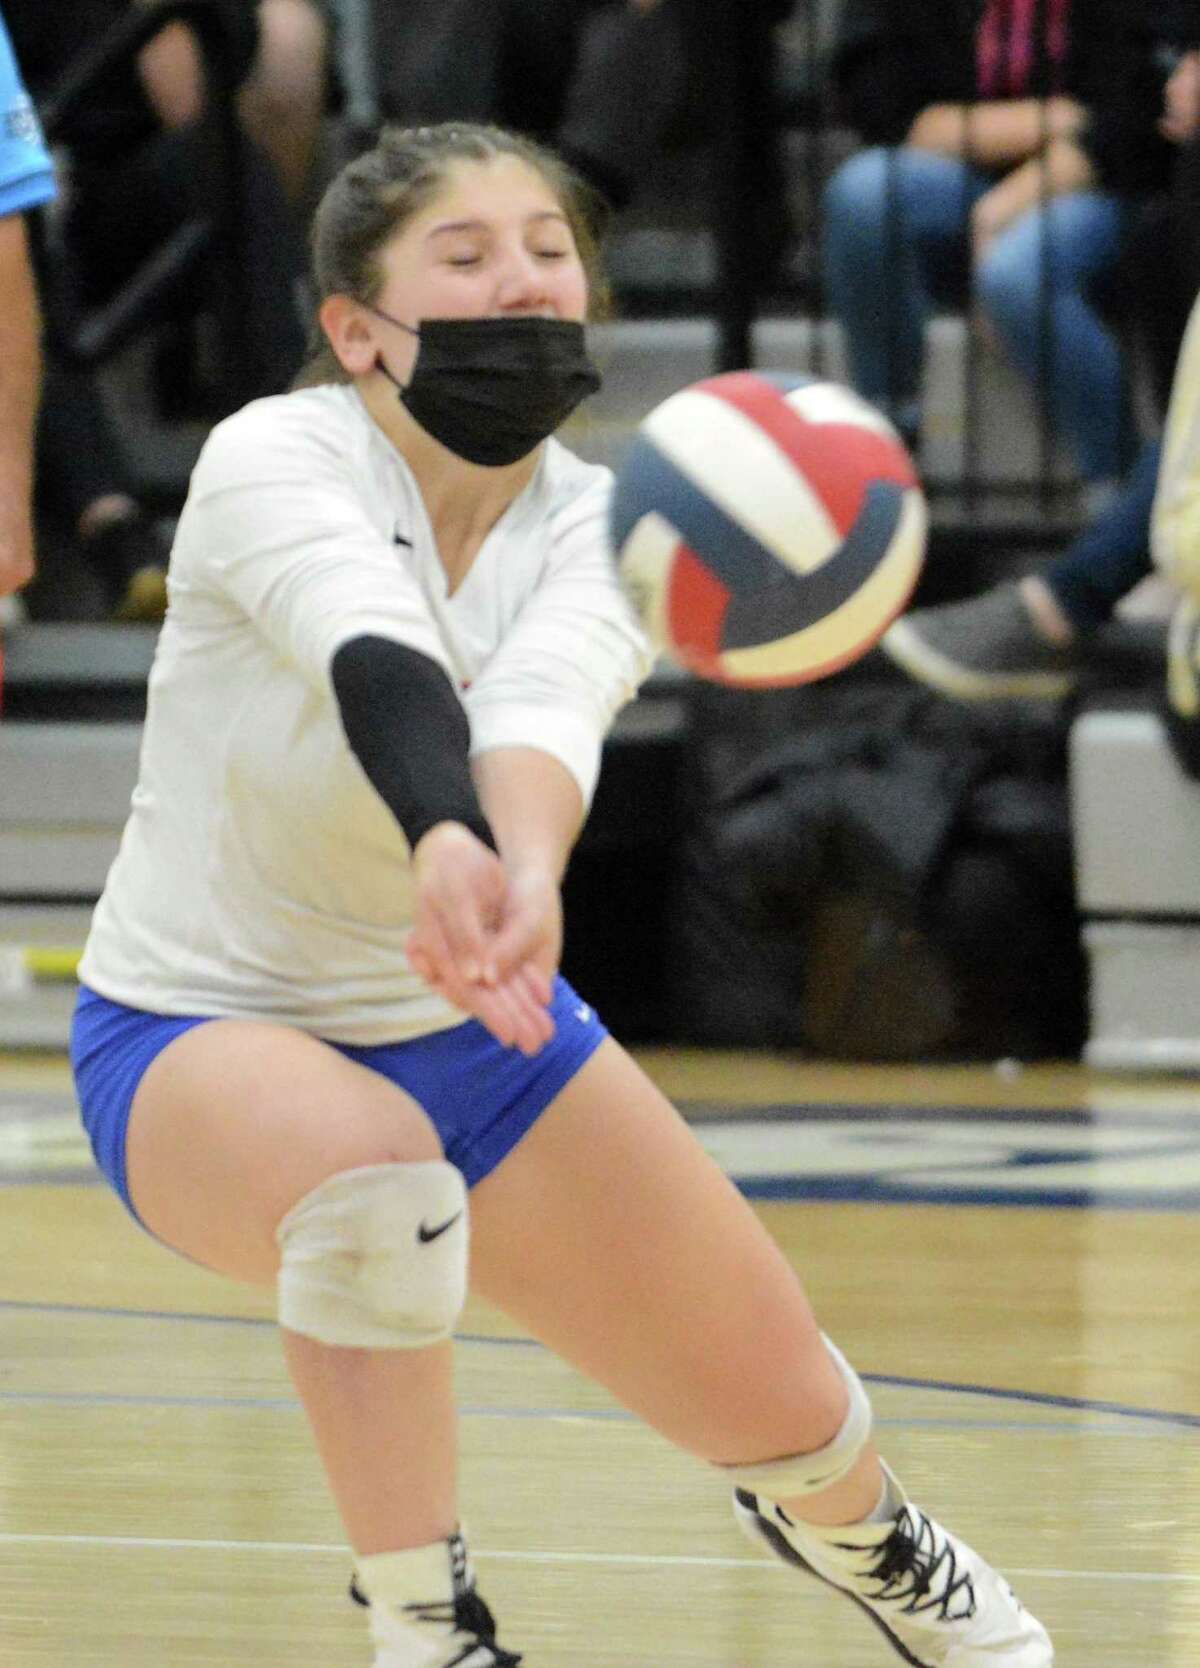 Mia Carta of Hale Ray returns a serve during the Shoreline Conference girls’ volleyball title game Friday night.